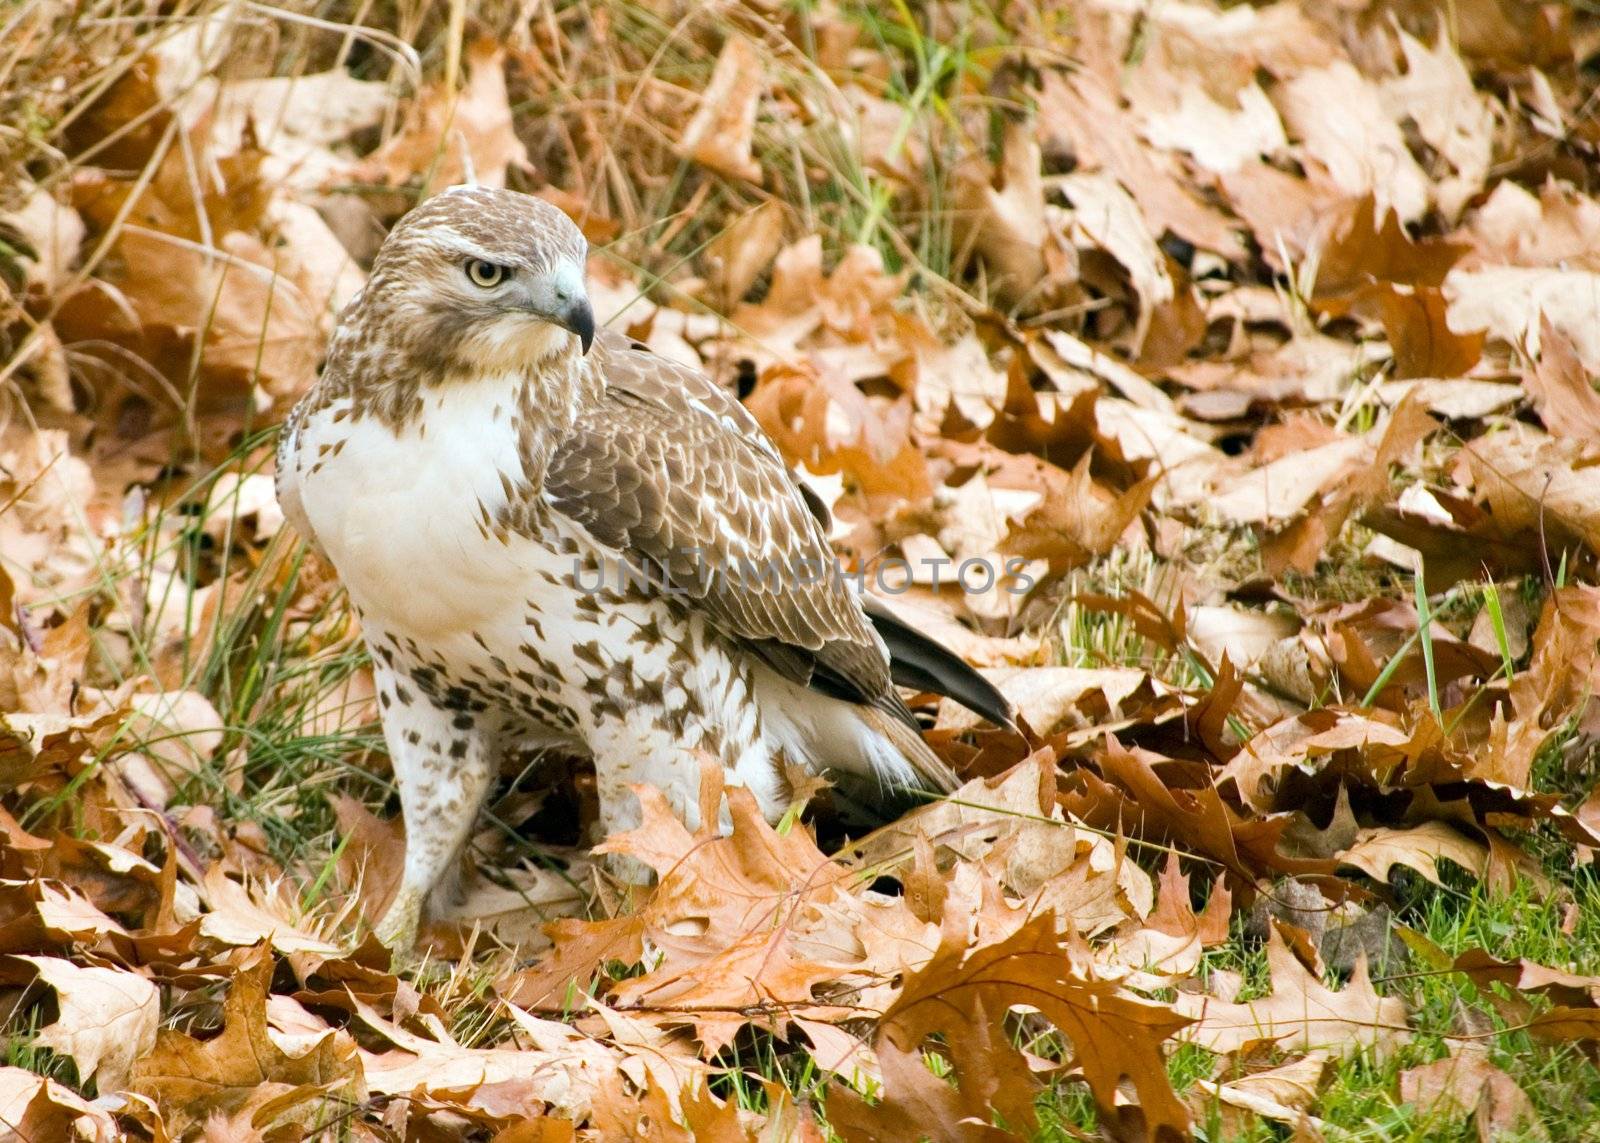 A Red-tailed hawk perched on the ground among fallen leaves.